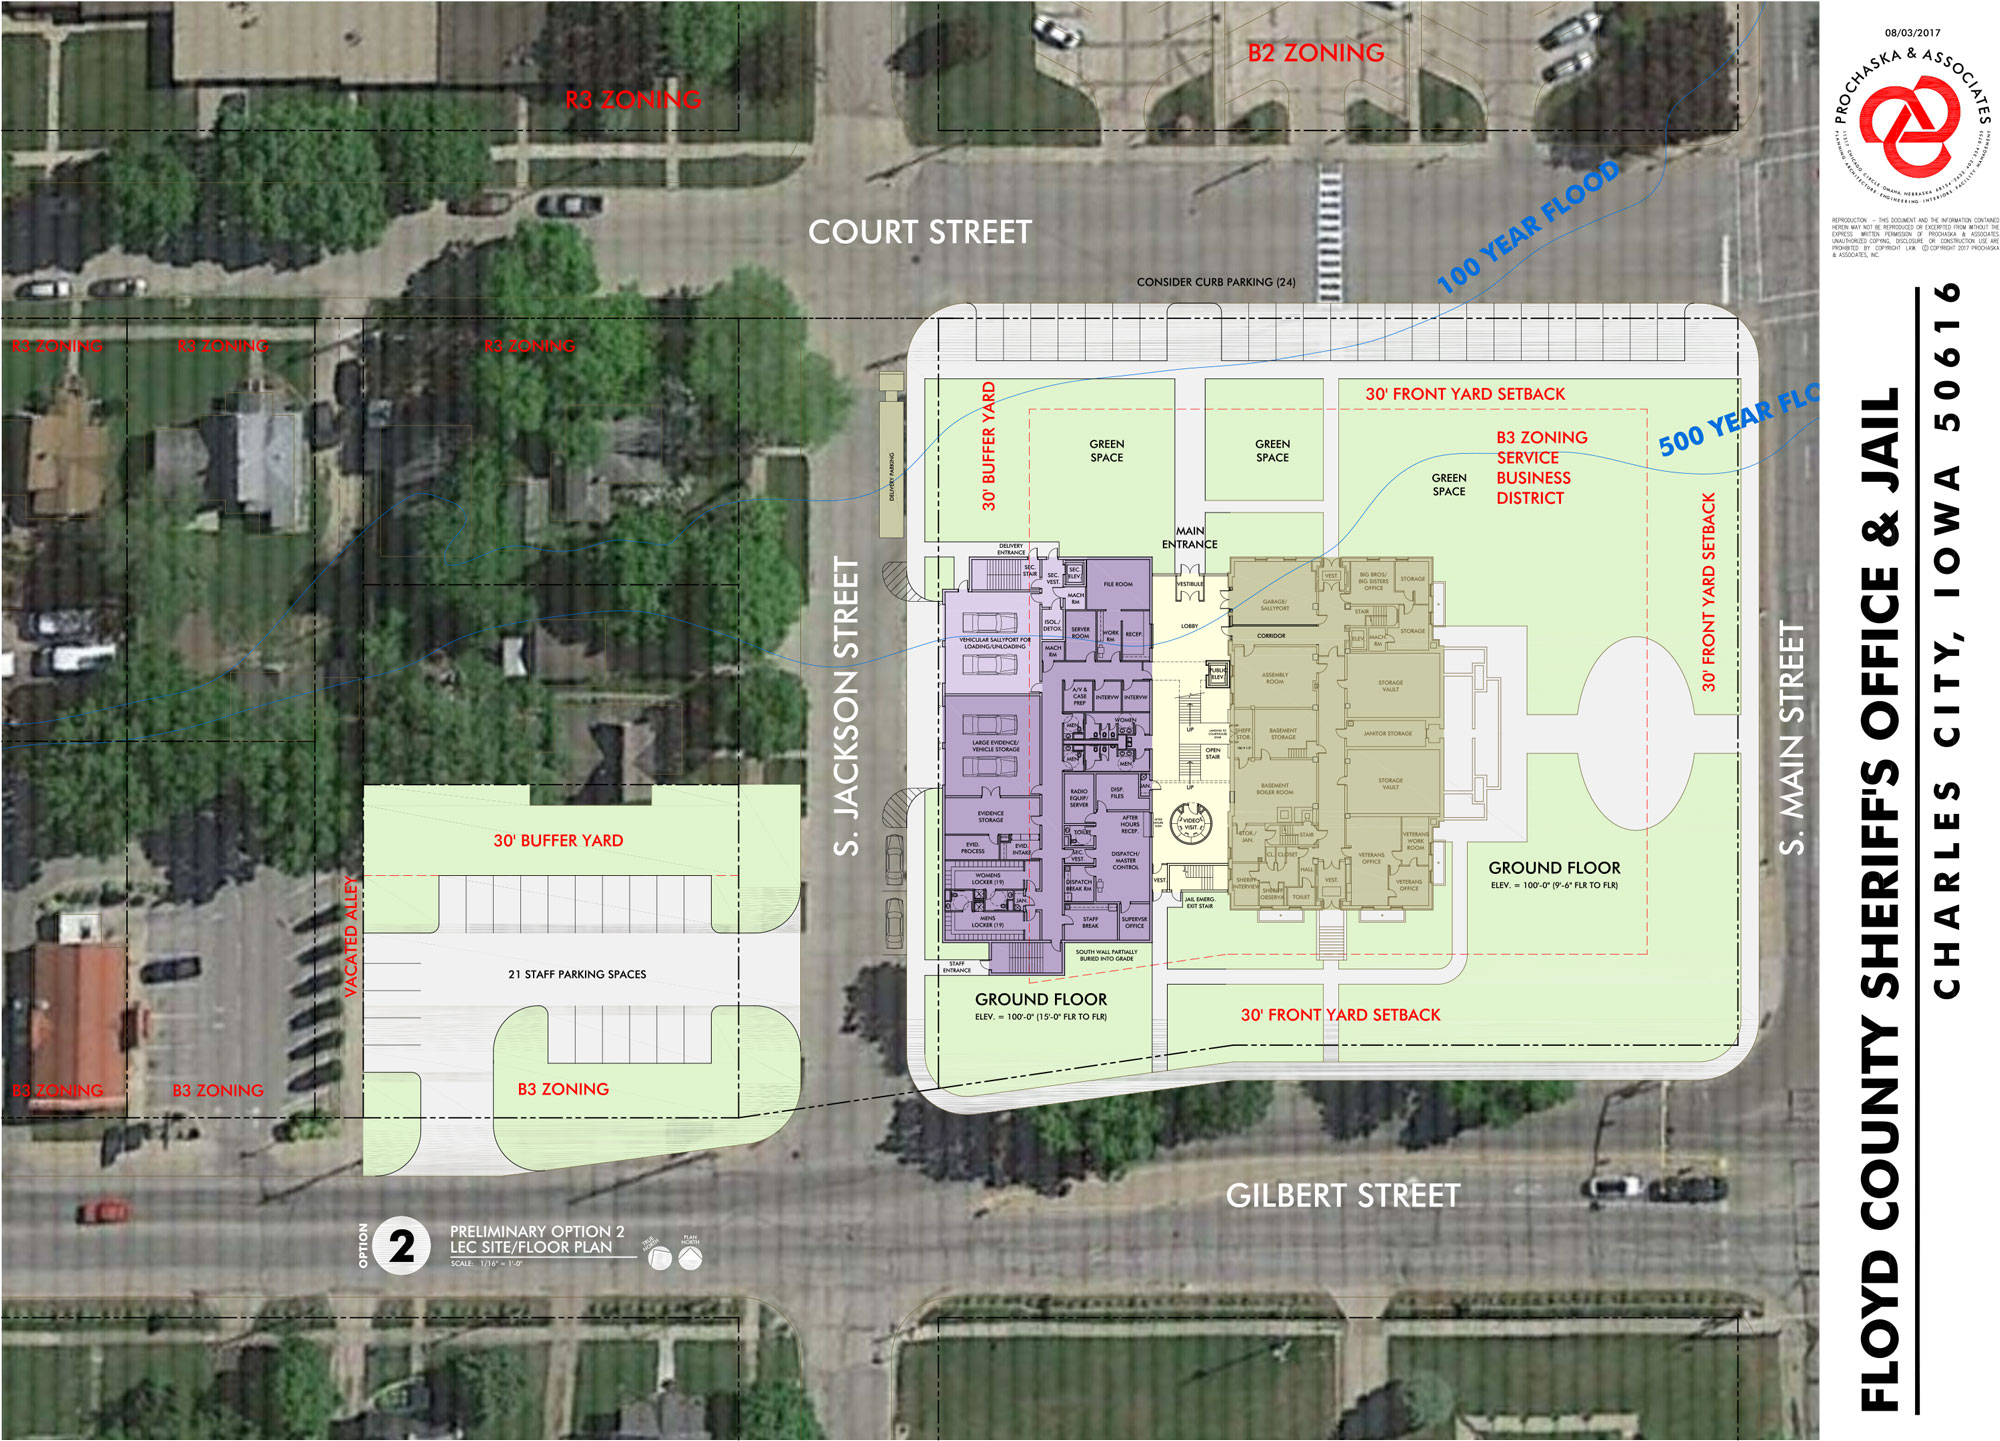 Multi-story option for new jail would take up less ground space, but poses own concerns